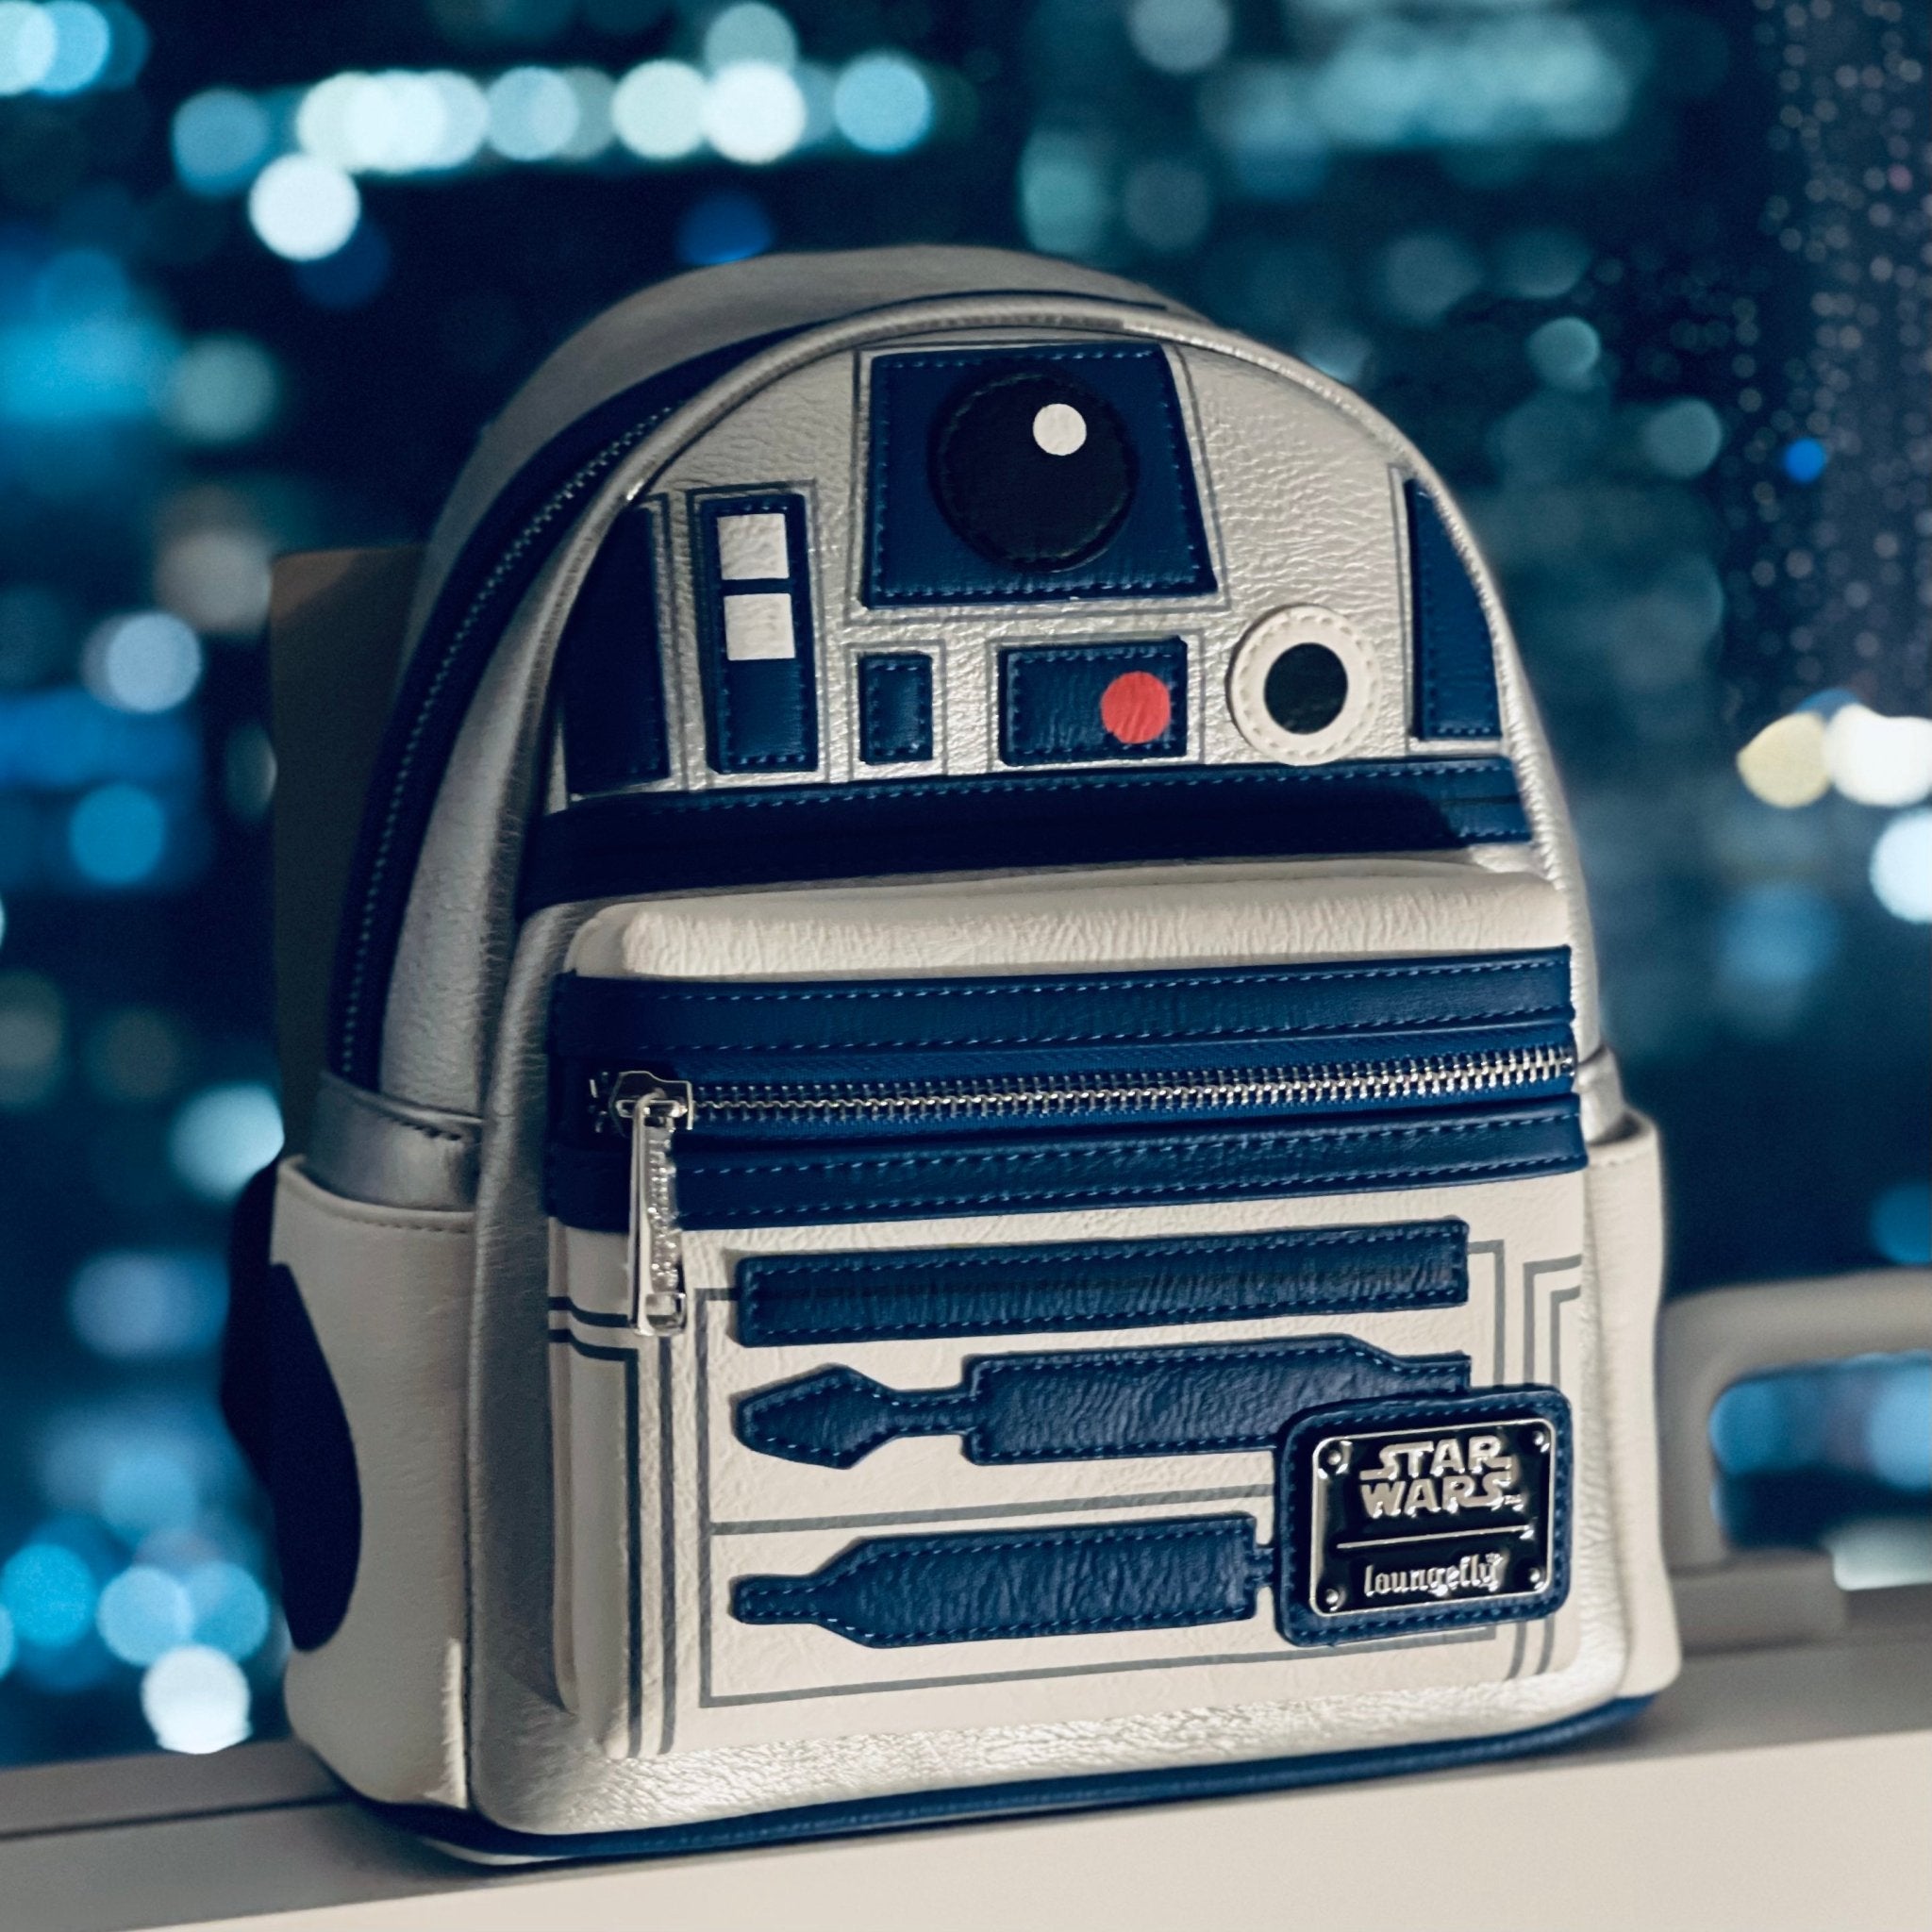 Loungefly x Star Wars R2 - D2 Mini Backpack - GeekCore